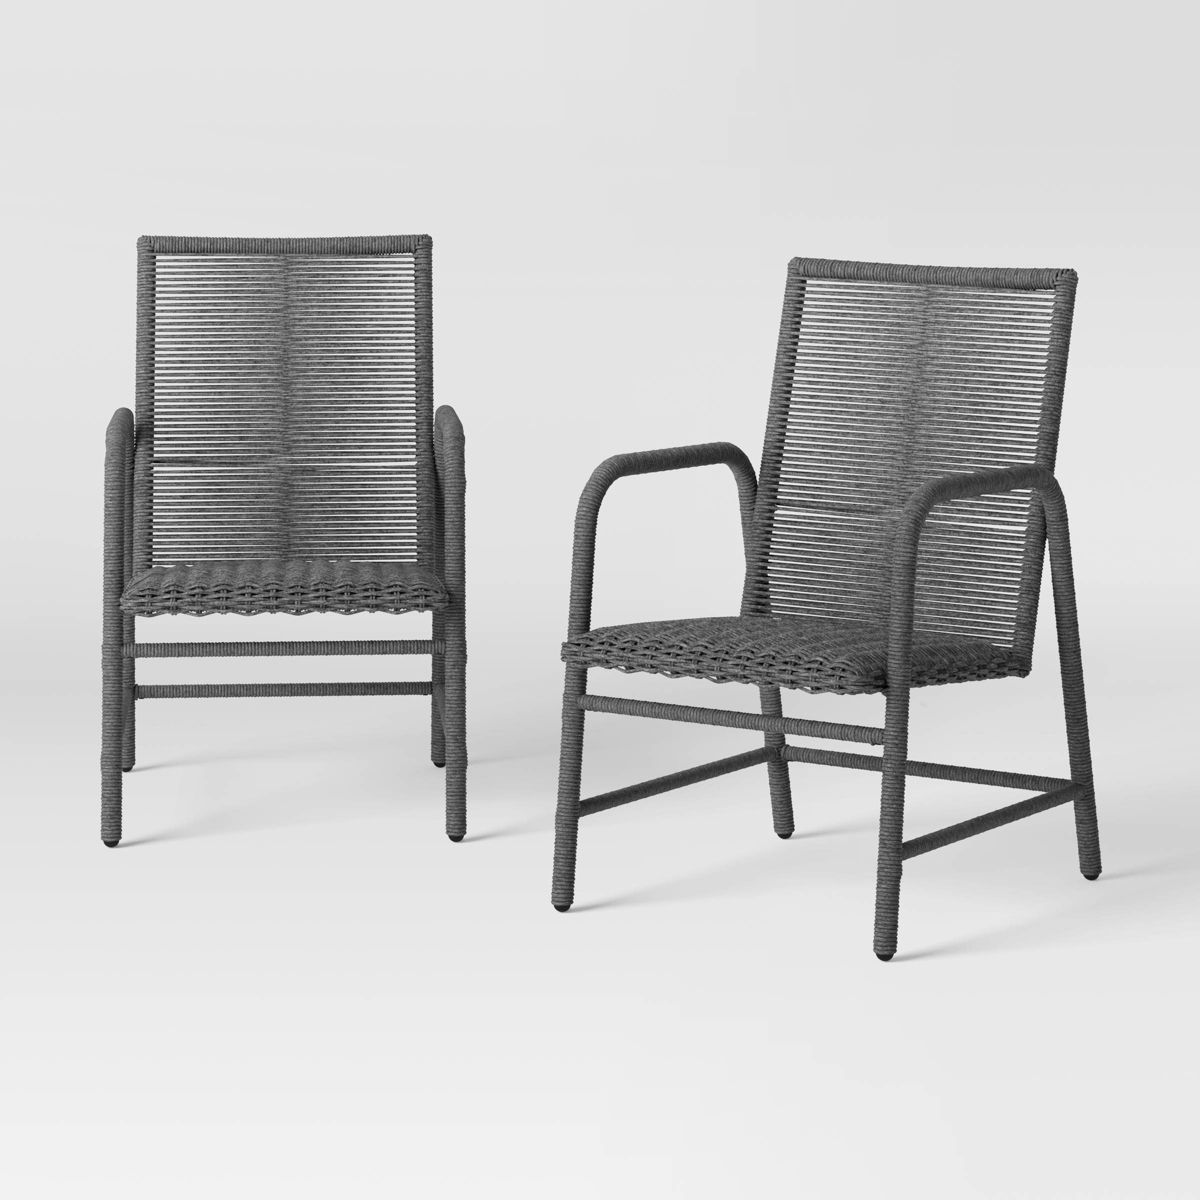 2pc Granby Padded Wicker Outdoor Patio Dining Chairs Arm Chairs Gray - Threshold™ | Target